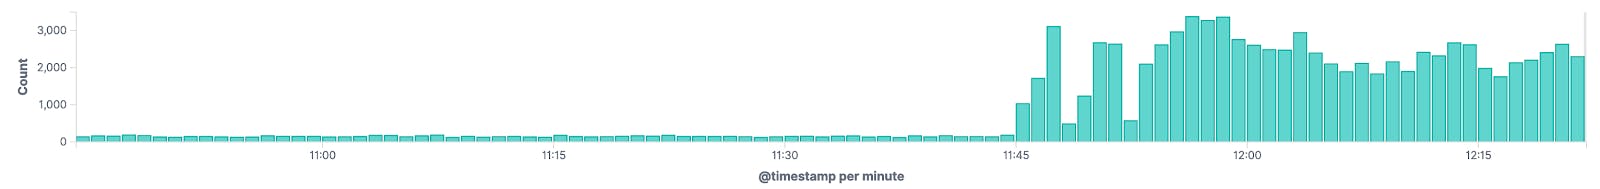 amazee.io Customer's Single Day of Traffic Growth: Before Media Event: an average of 180 hits per minutes; After Media Event: 3300 hits per minute